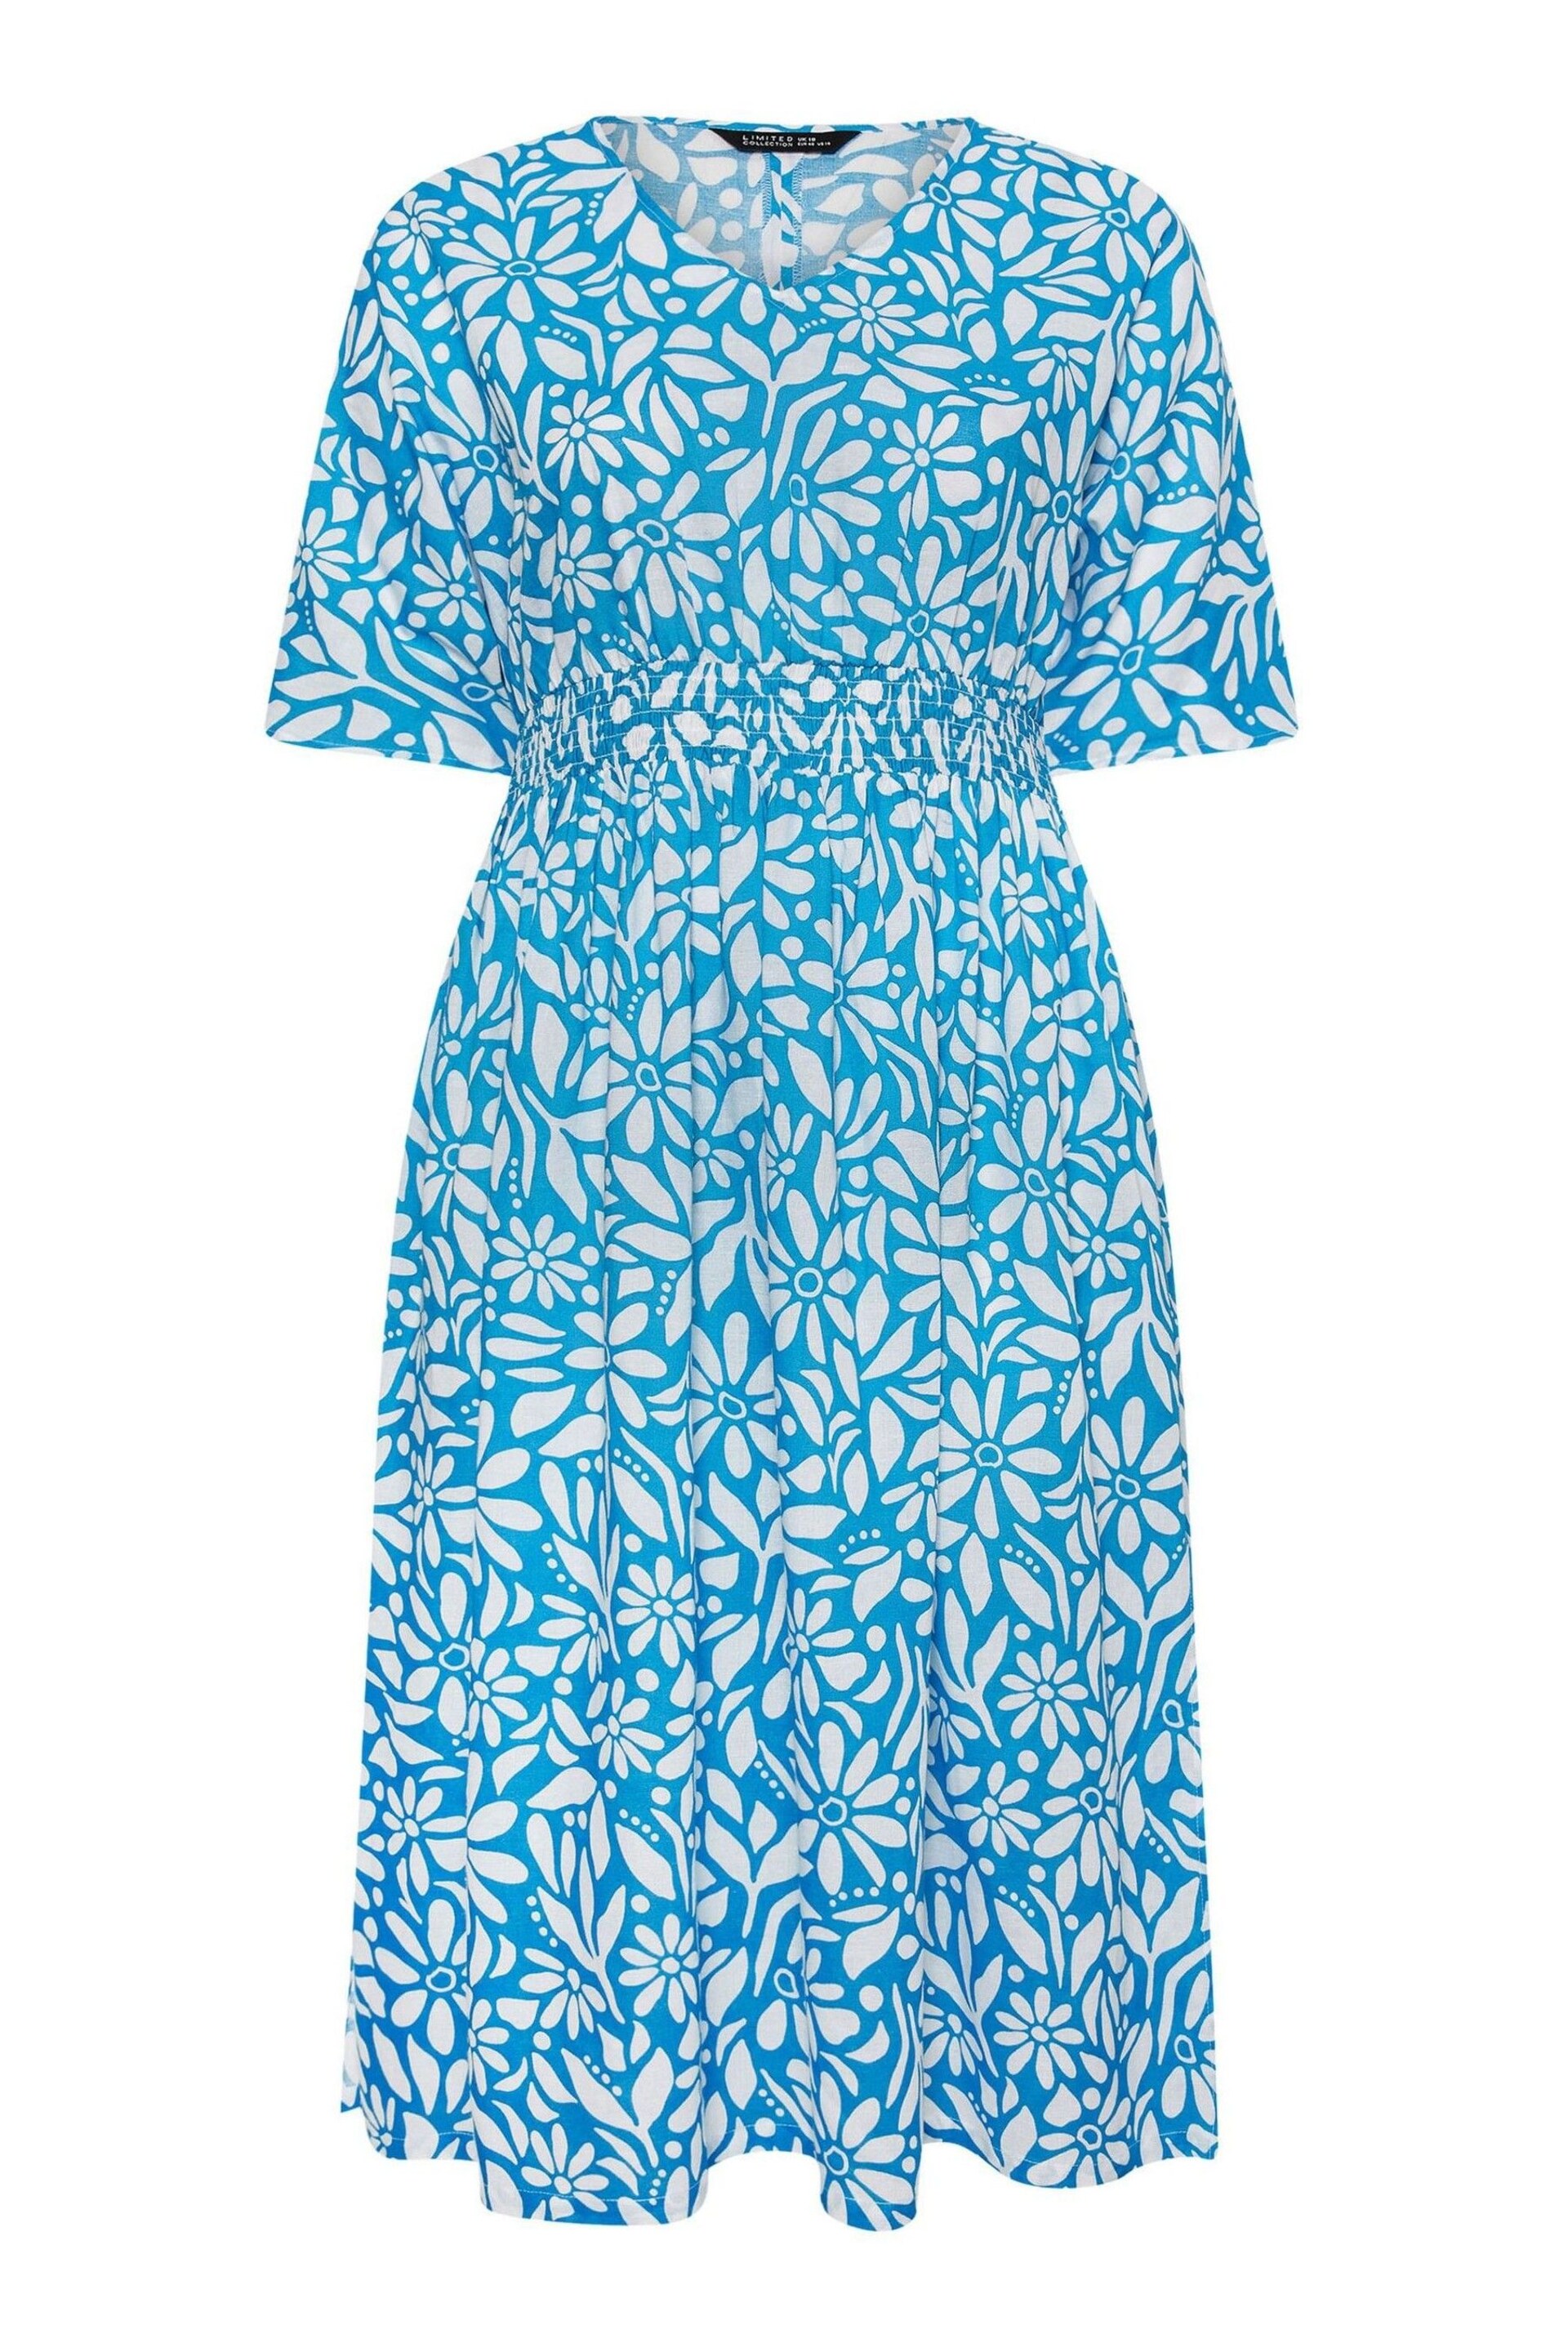 Yours Curve Blue LIMITED COLLECTION  Floral Print Linen Midaxi Dress - Image 5 of 5